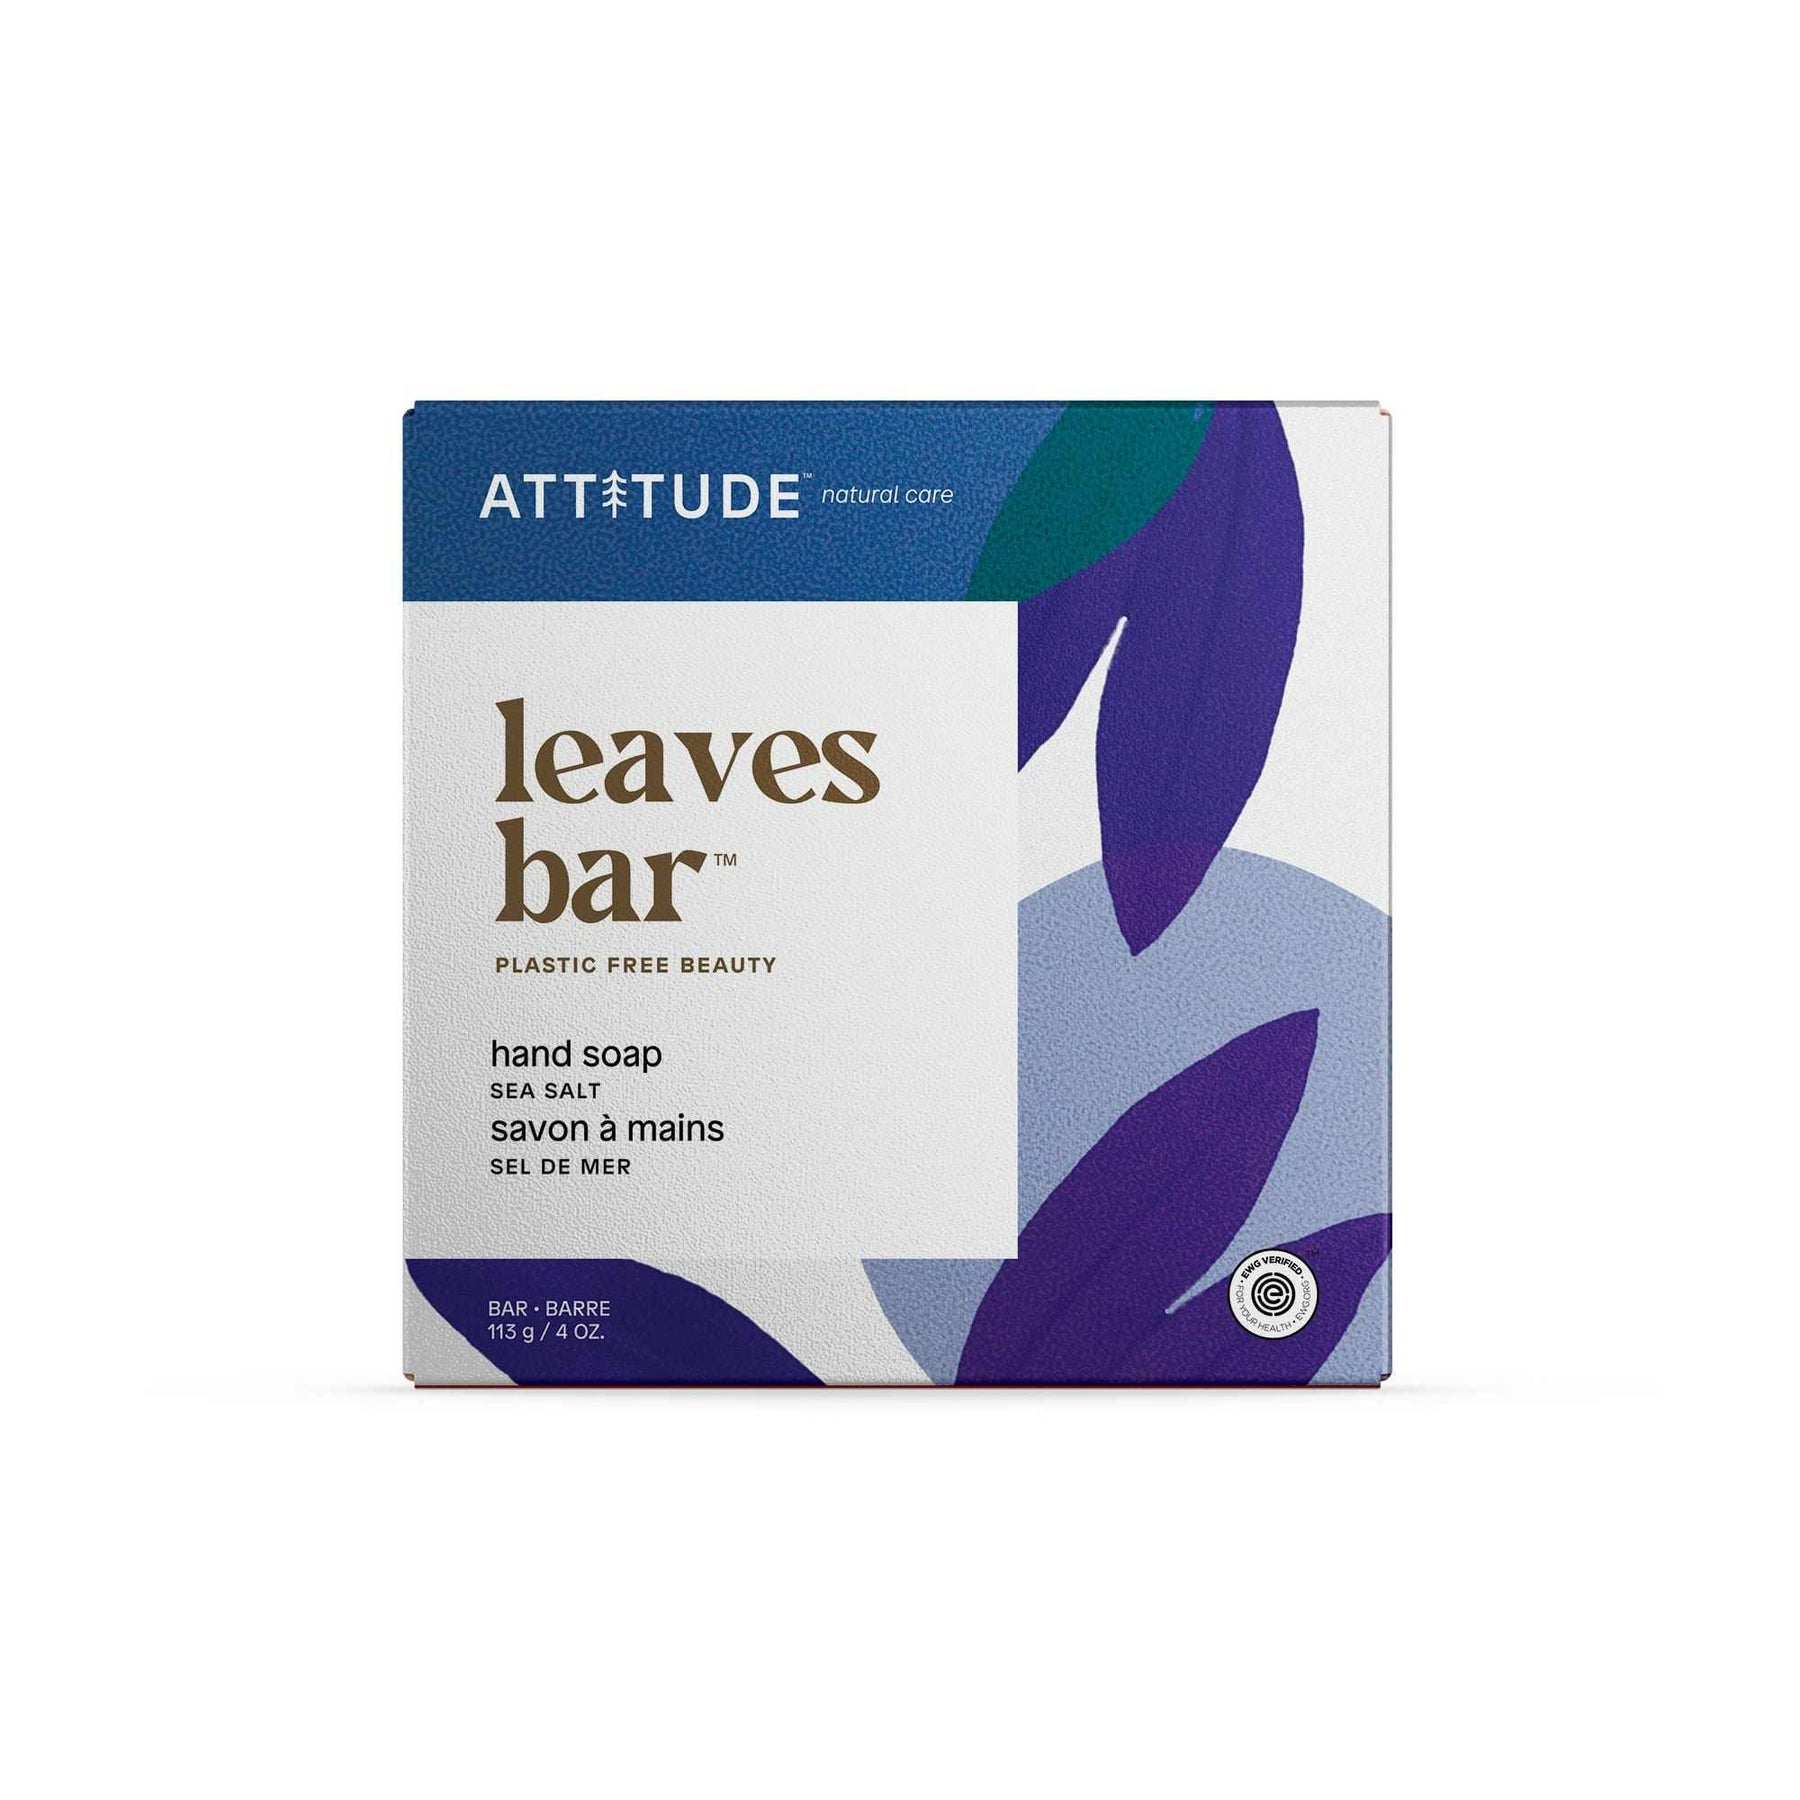 Hand Soap : leaves bar™ - by Attitude |ProCare Outlet|